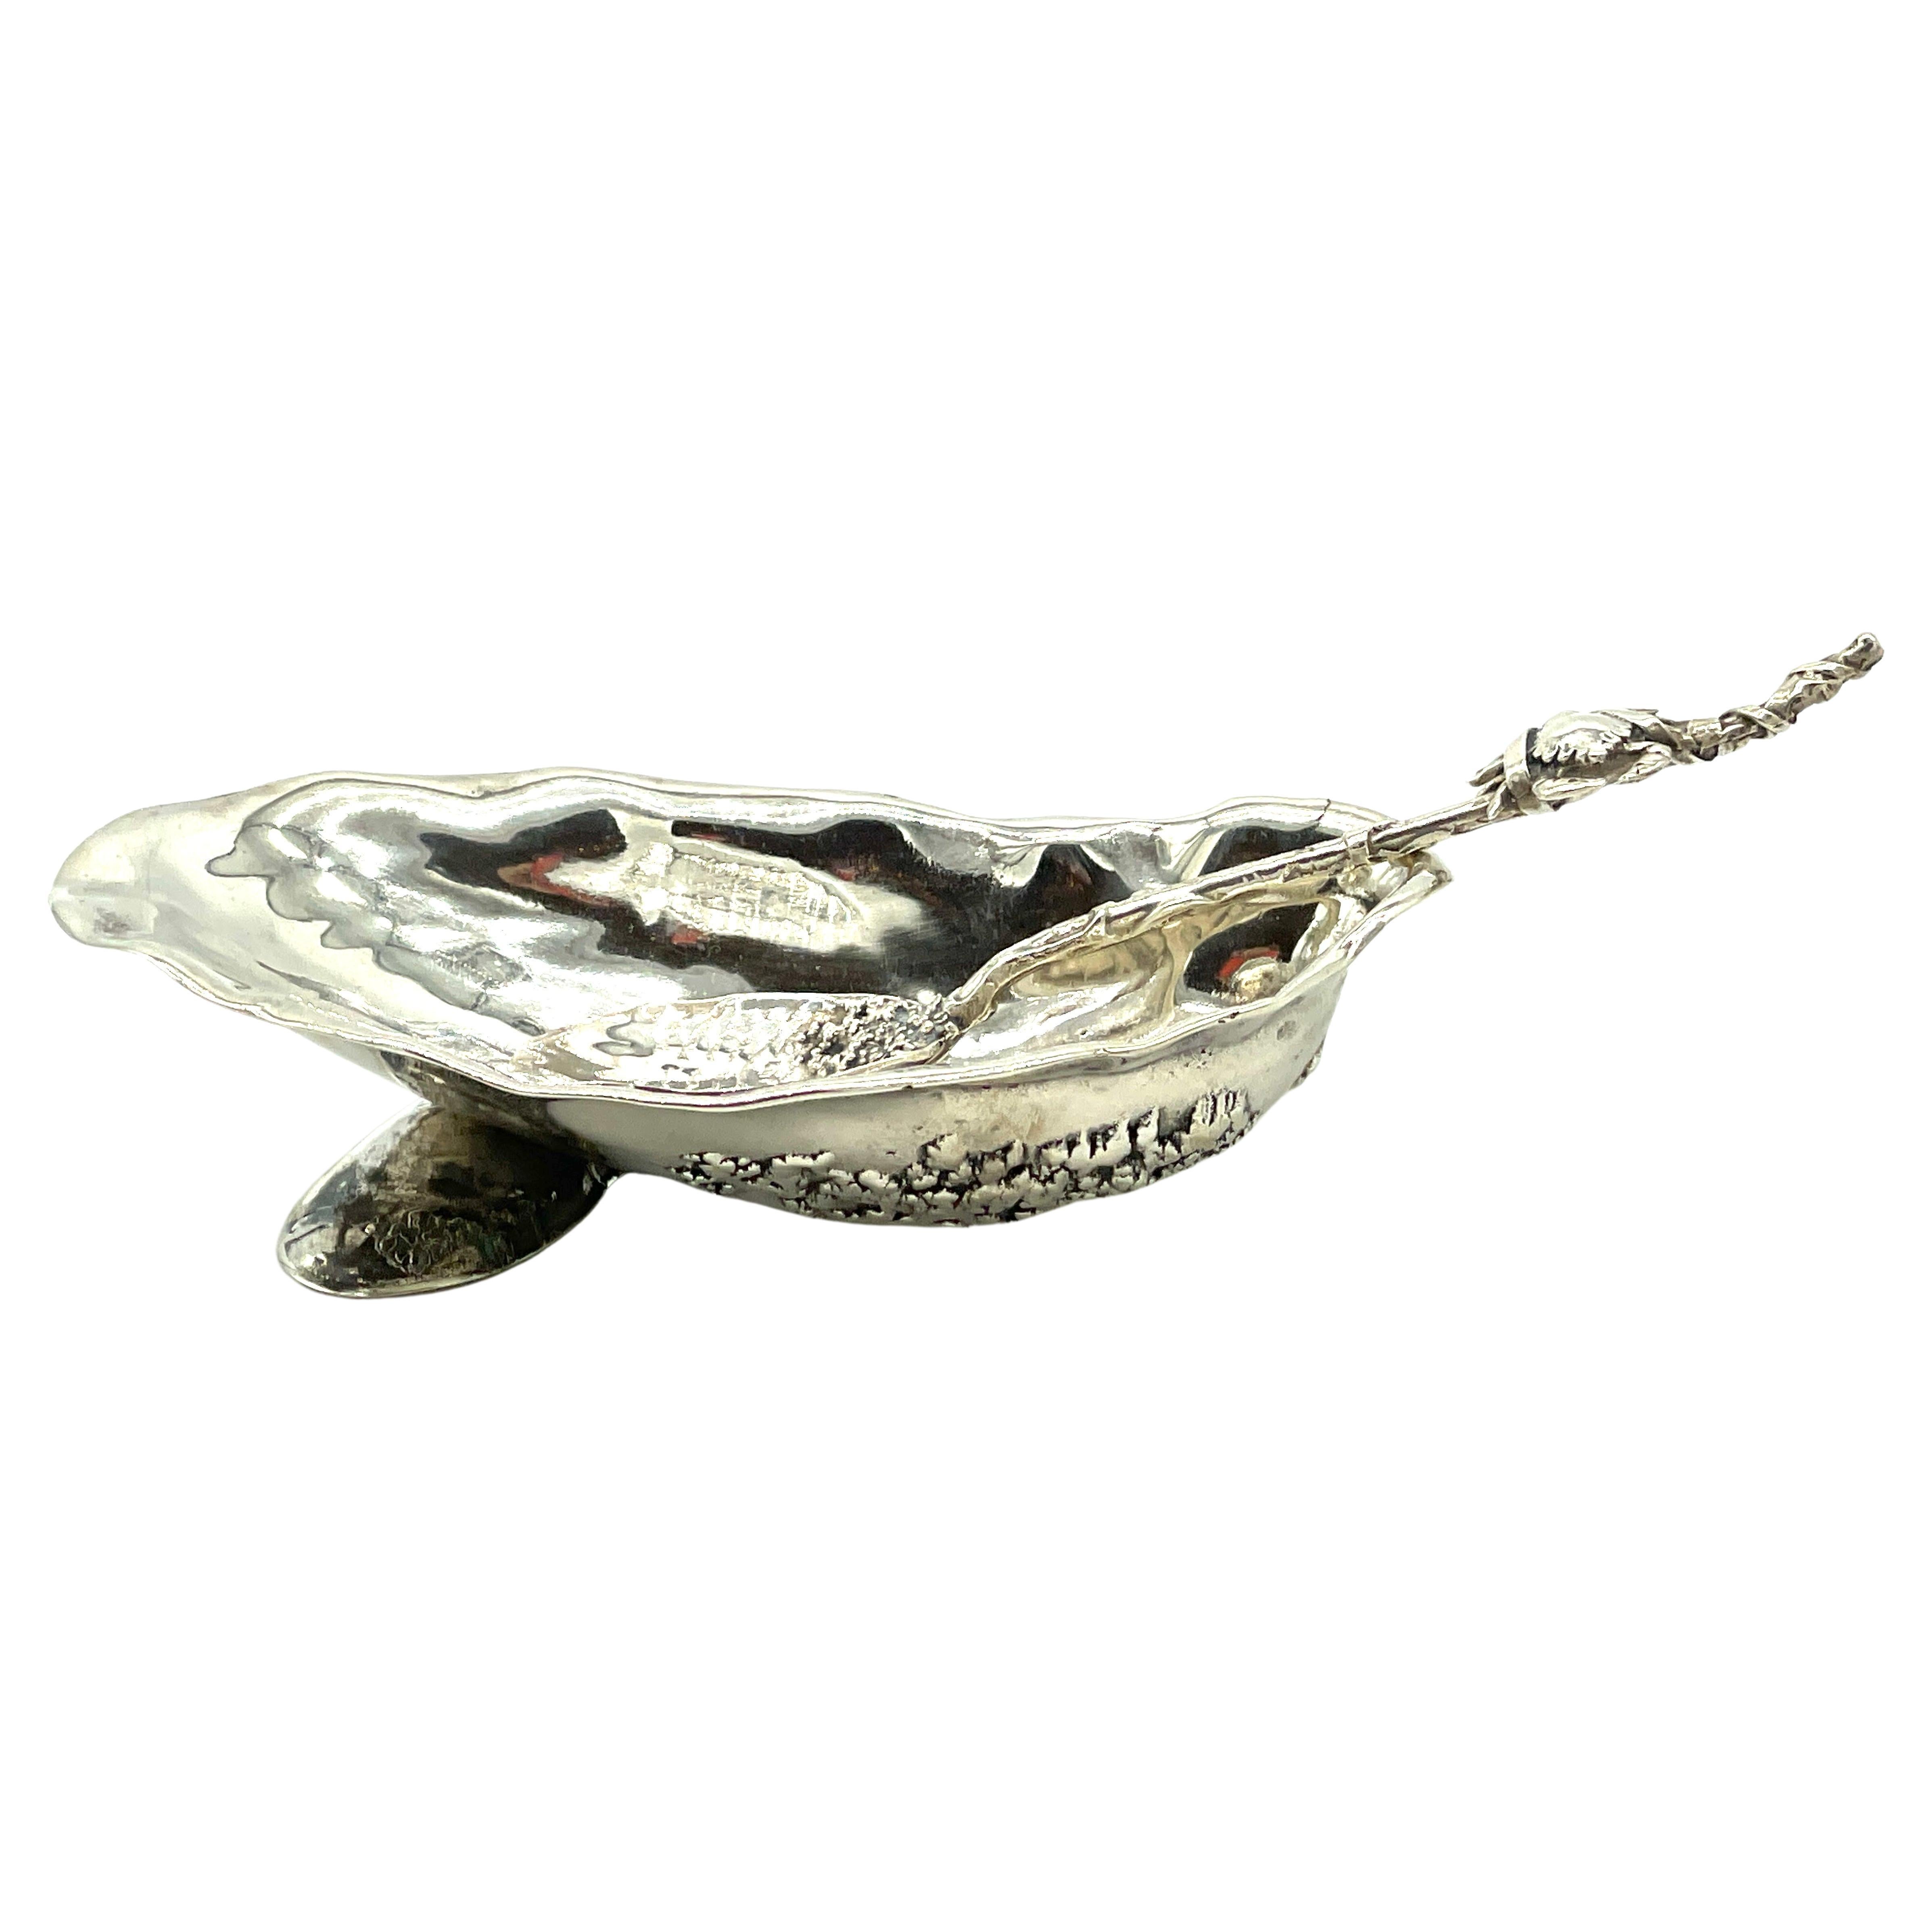 Gorham 'Narragansett' Sterling- Silver Shell Dish & Figural Crab Spoon
USA, circa 1890s 

A rare find, two piece set in one of scarcest patterns of the Gorham Mfg. Co. 'Narragansett', a sculptural Shell Dish & Figural Crab Spoon, this offering is